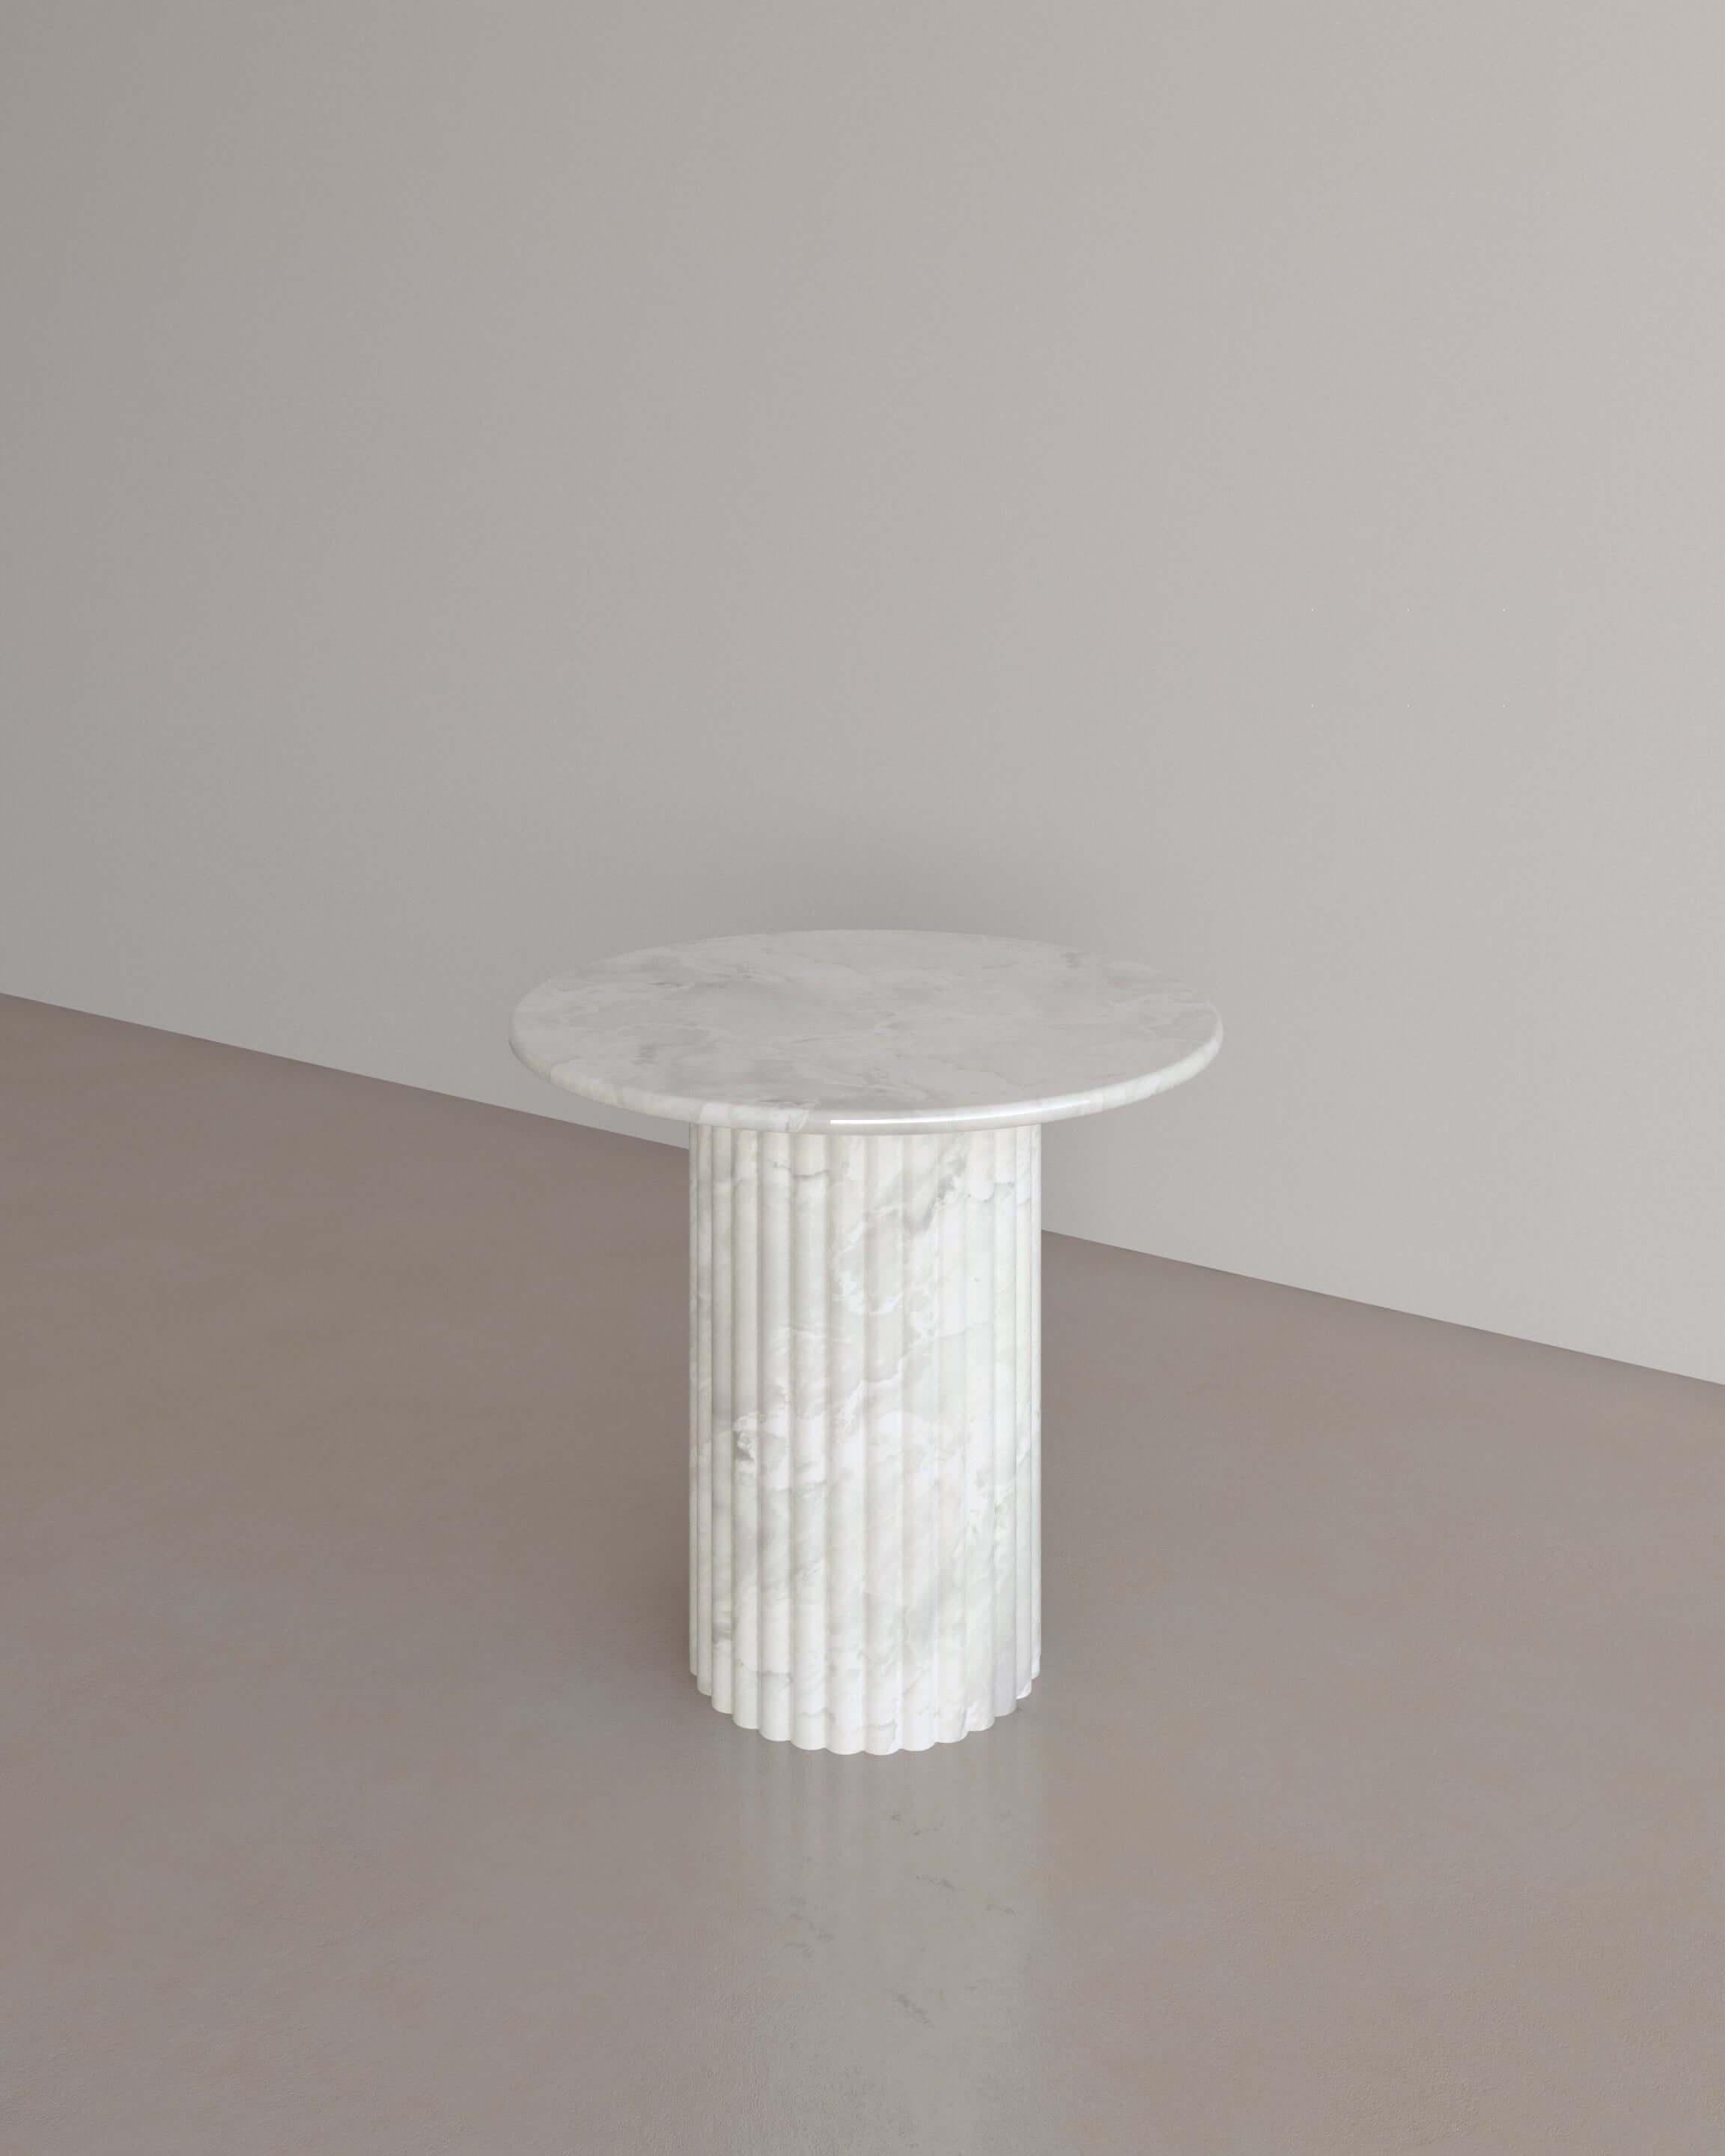 Marble Viola Antica Occasional Table by the Essentialist For Sale